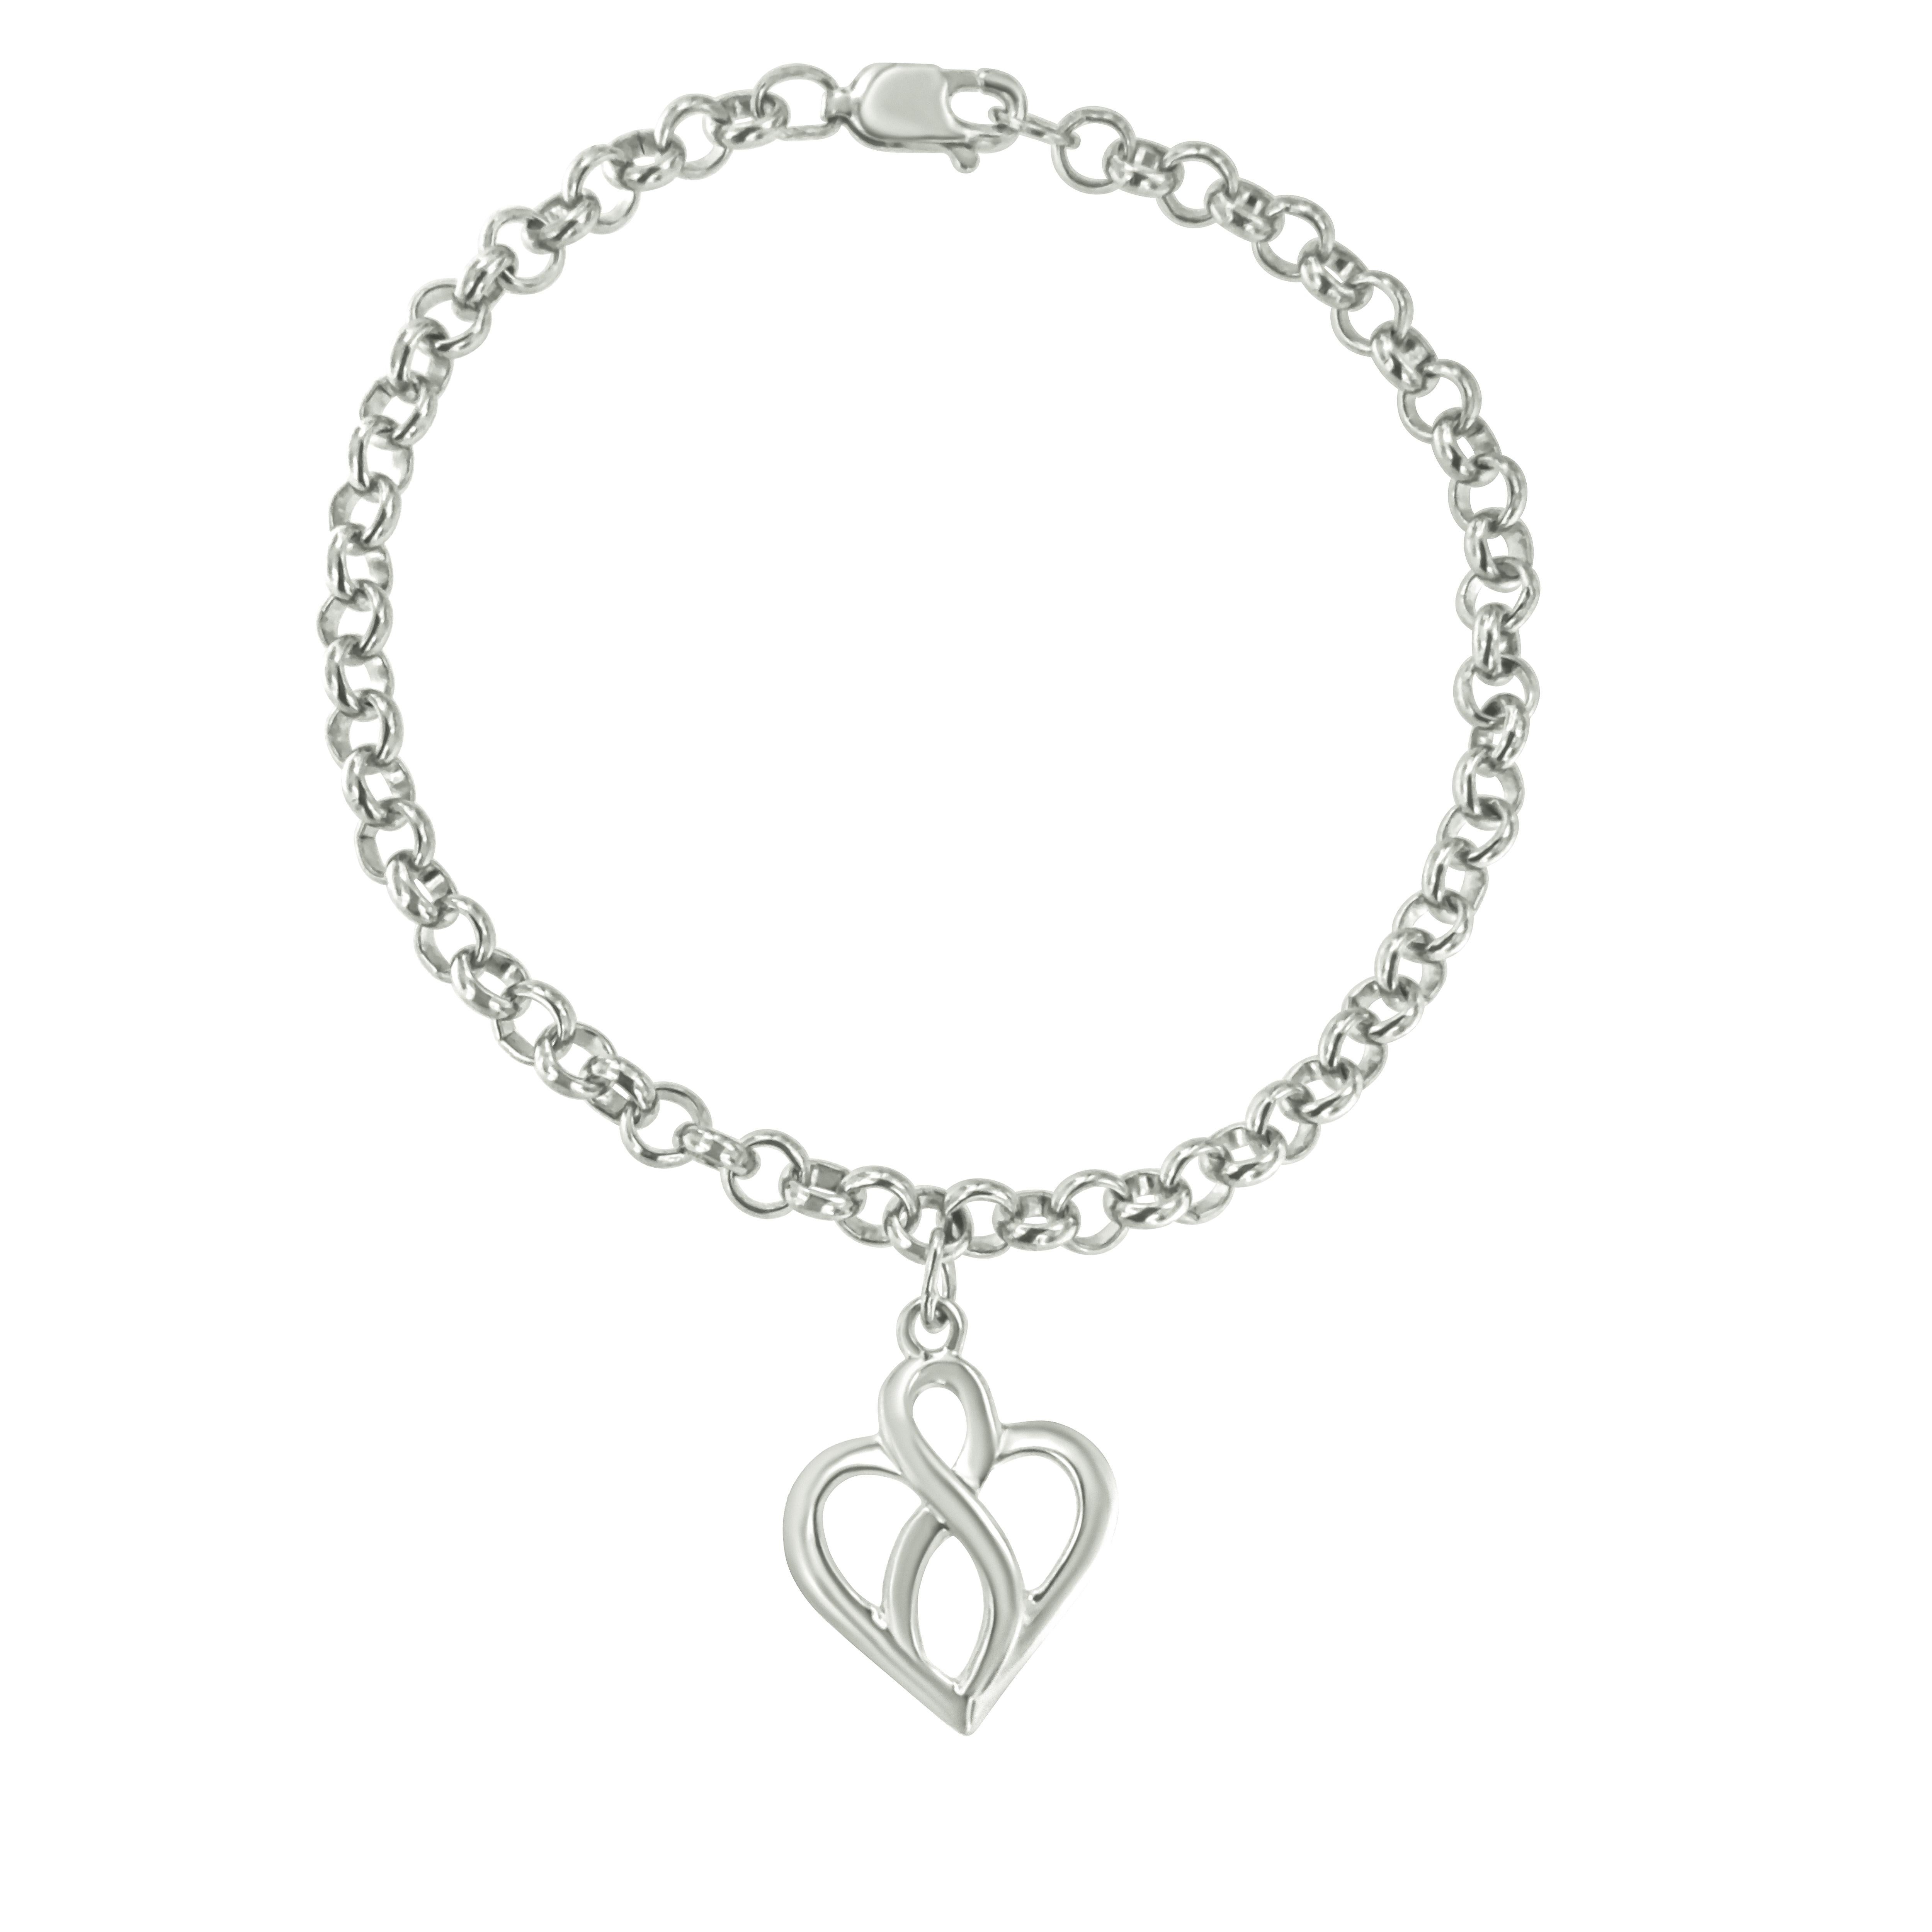 This fine .925 sterling silver pendant bracelet holds a meaningful message within its openwork silhouette. Graceful, sweeping lines of sterling silver first form an open heart shape, and center there is an infinity symbol which represent